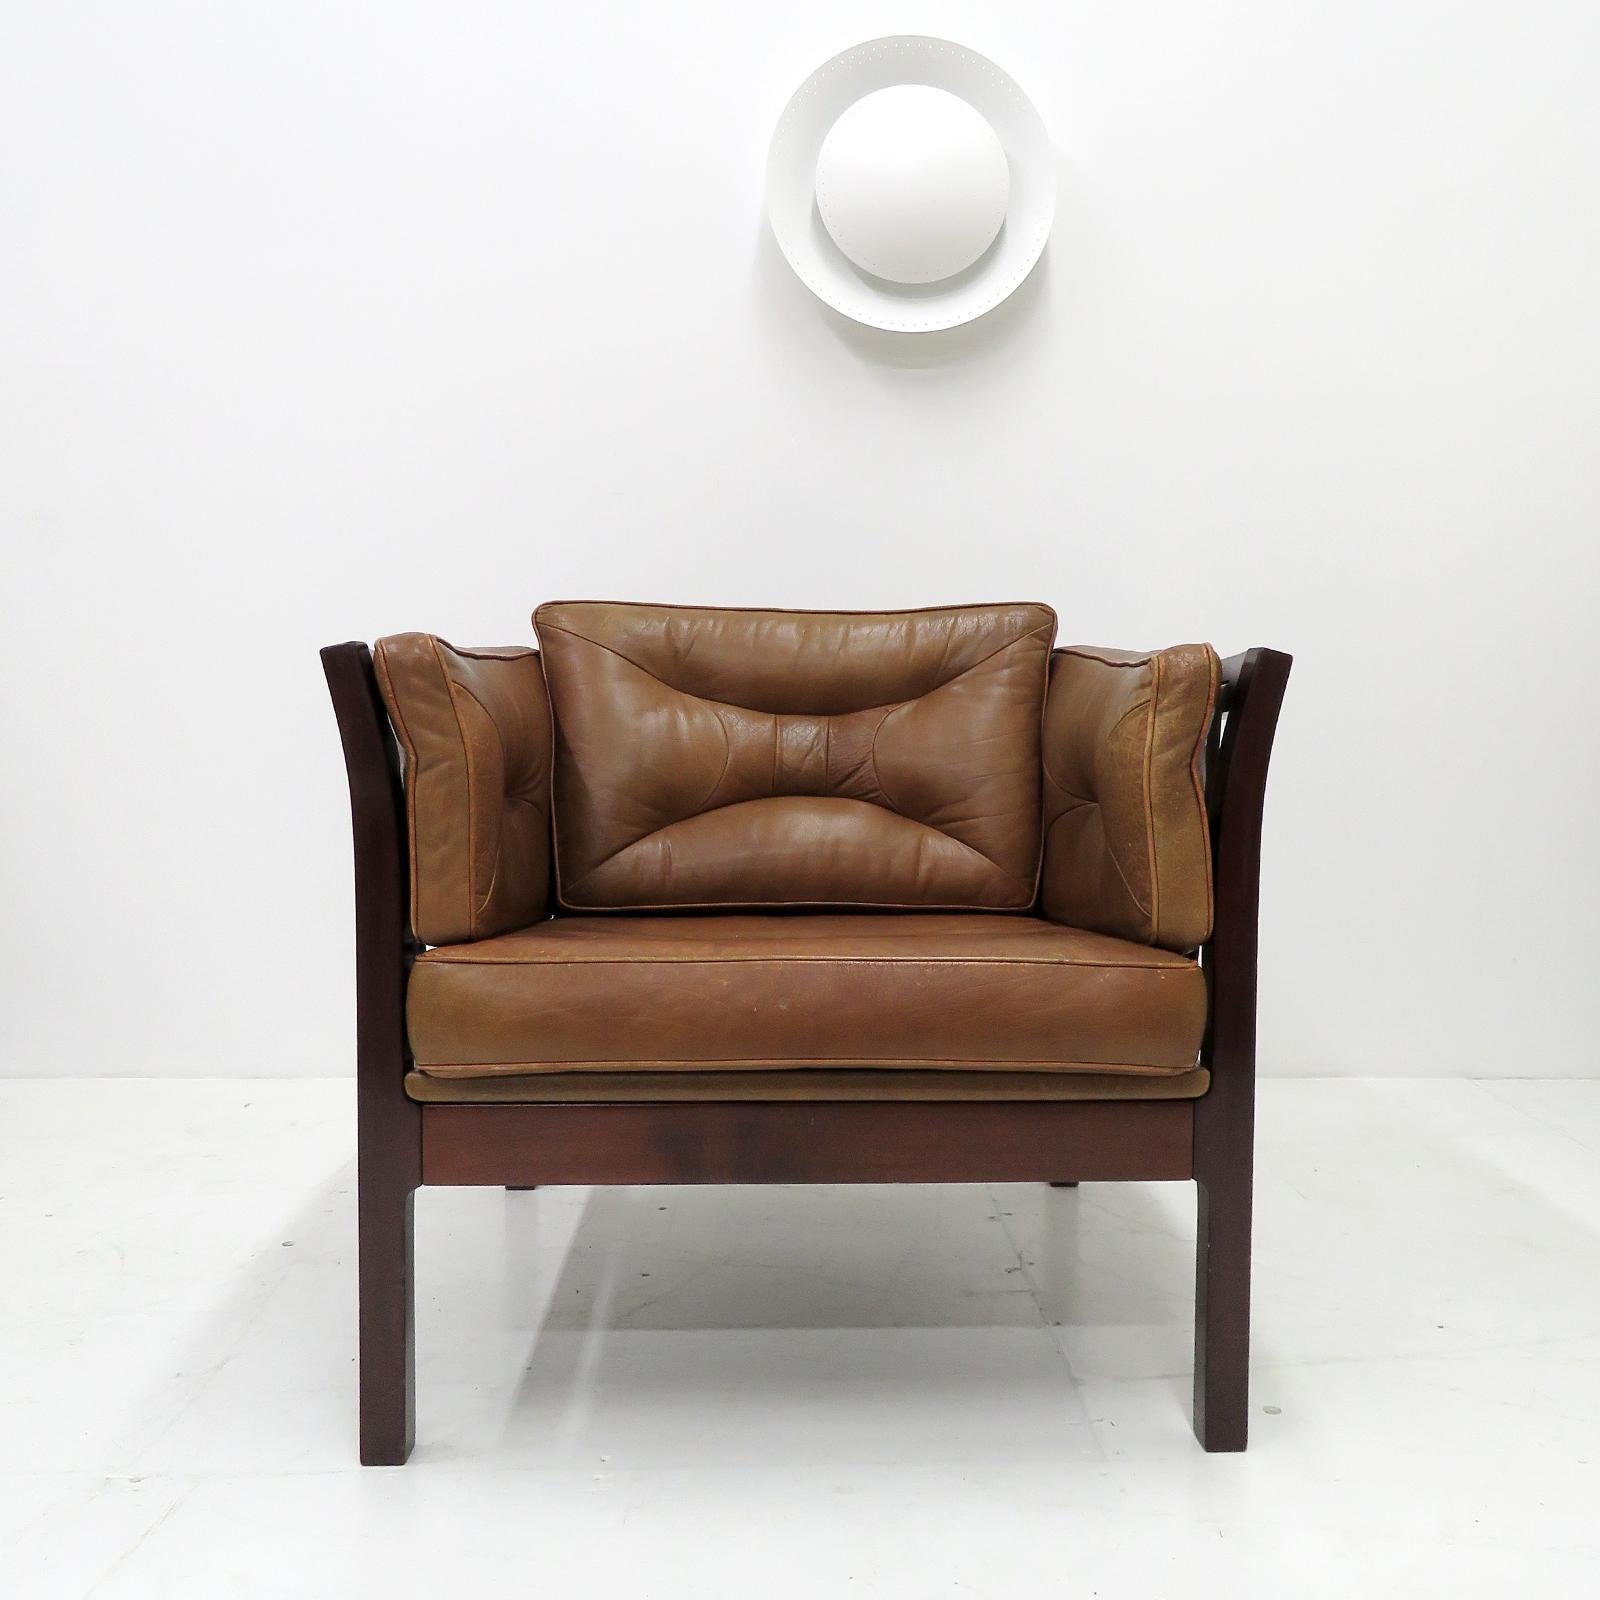 Wonderful, compact Danish Modern lounge chair, designed in 1960, dark stained beech frame with leather straps and thick leather upholstery.